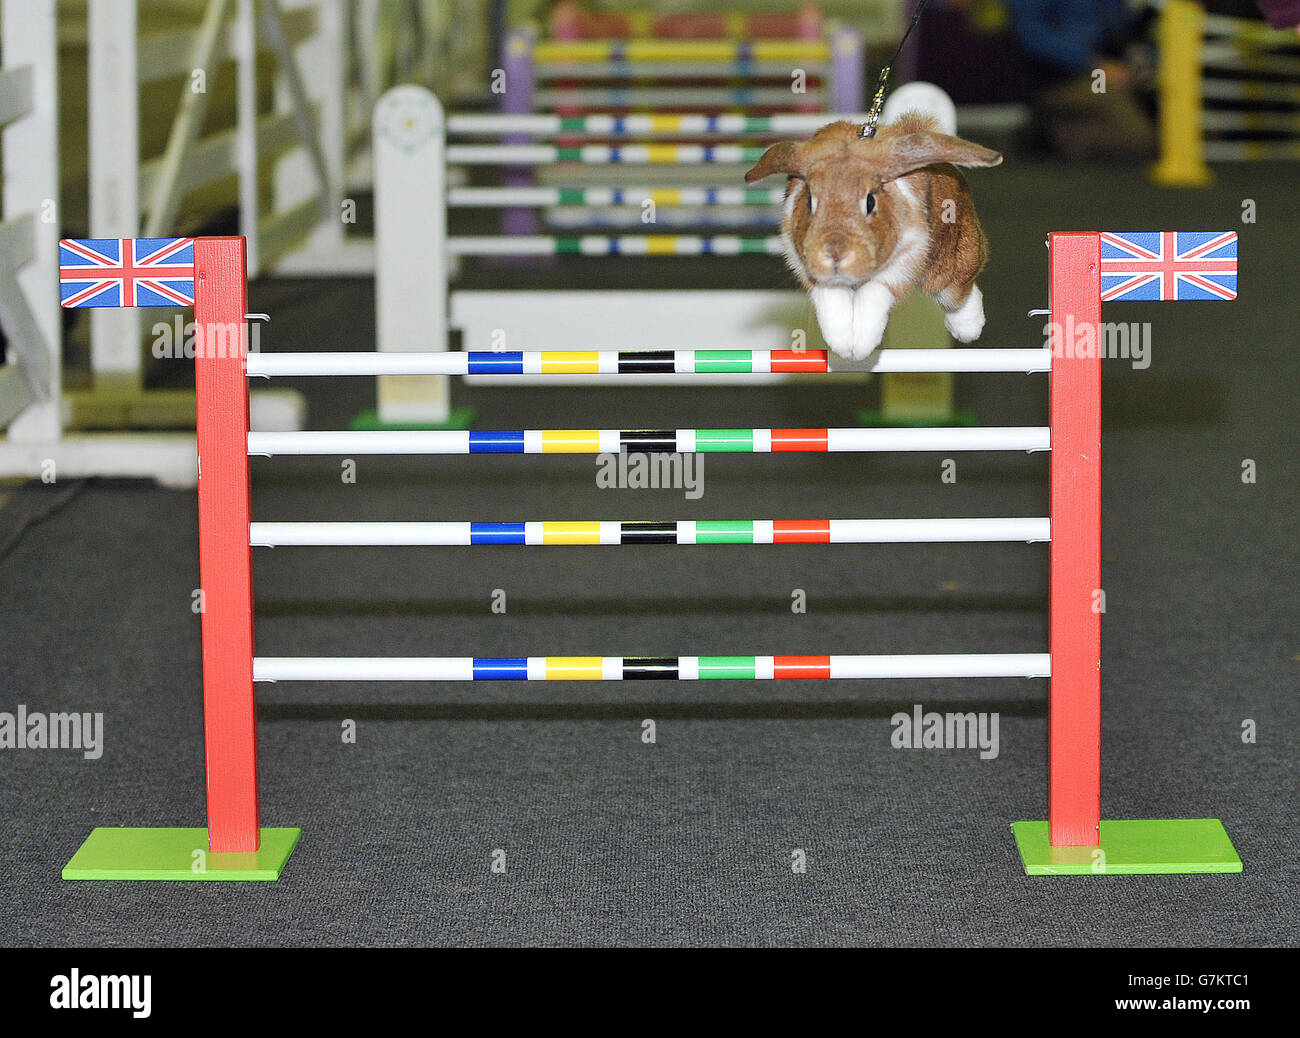 Mio, one of the show jumping rabbits, in action at Burgess Premier Small Animal Show, in Harrogate, North Yorkshire. Stock Photo